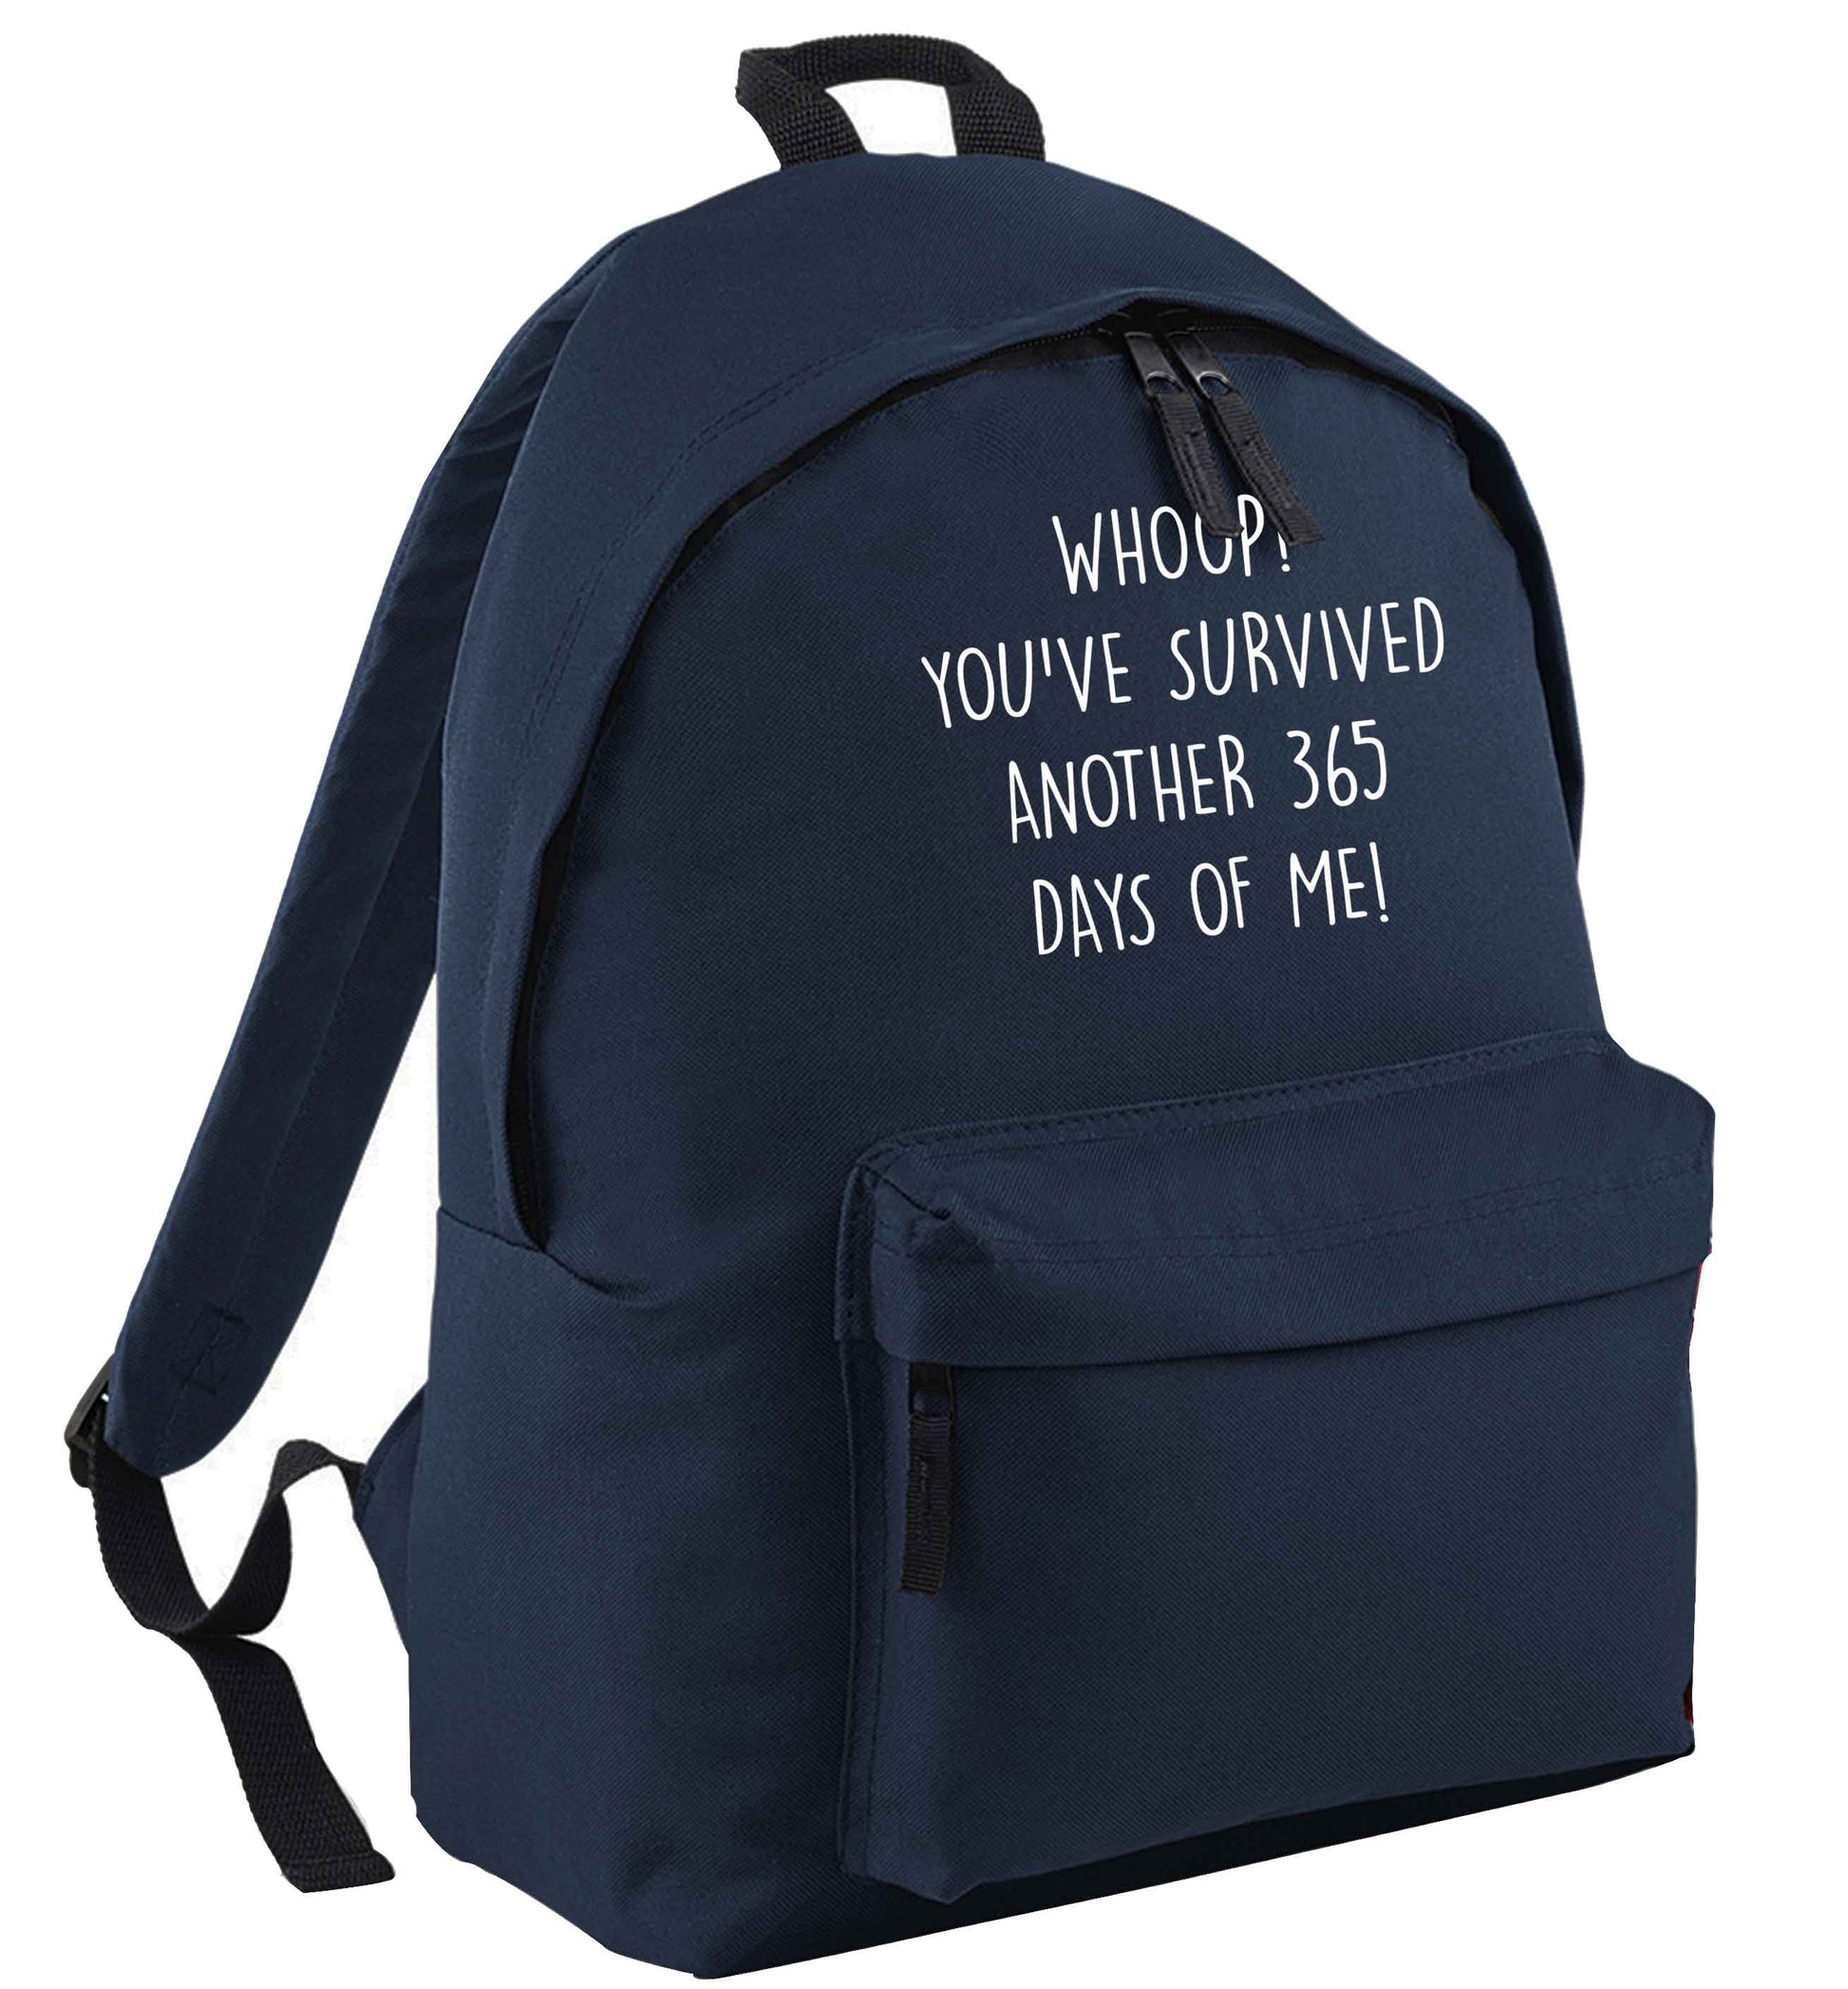 Whoop! You've survived another 365 days with me! navy adults backpack